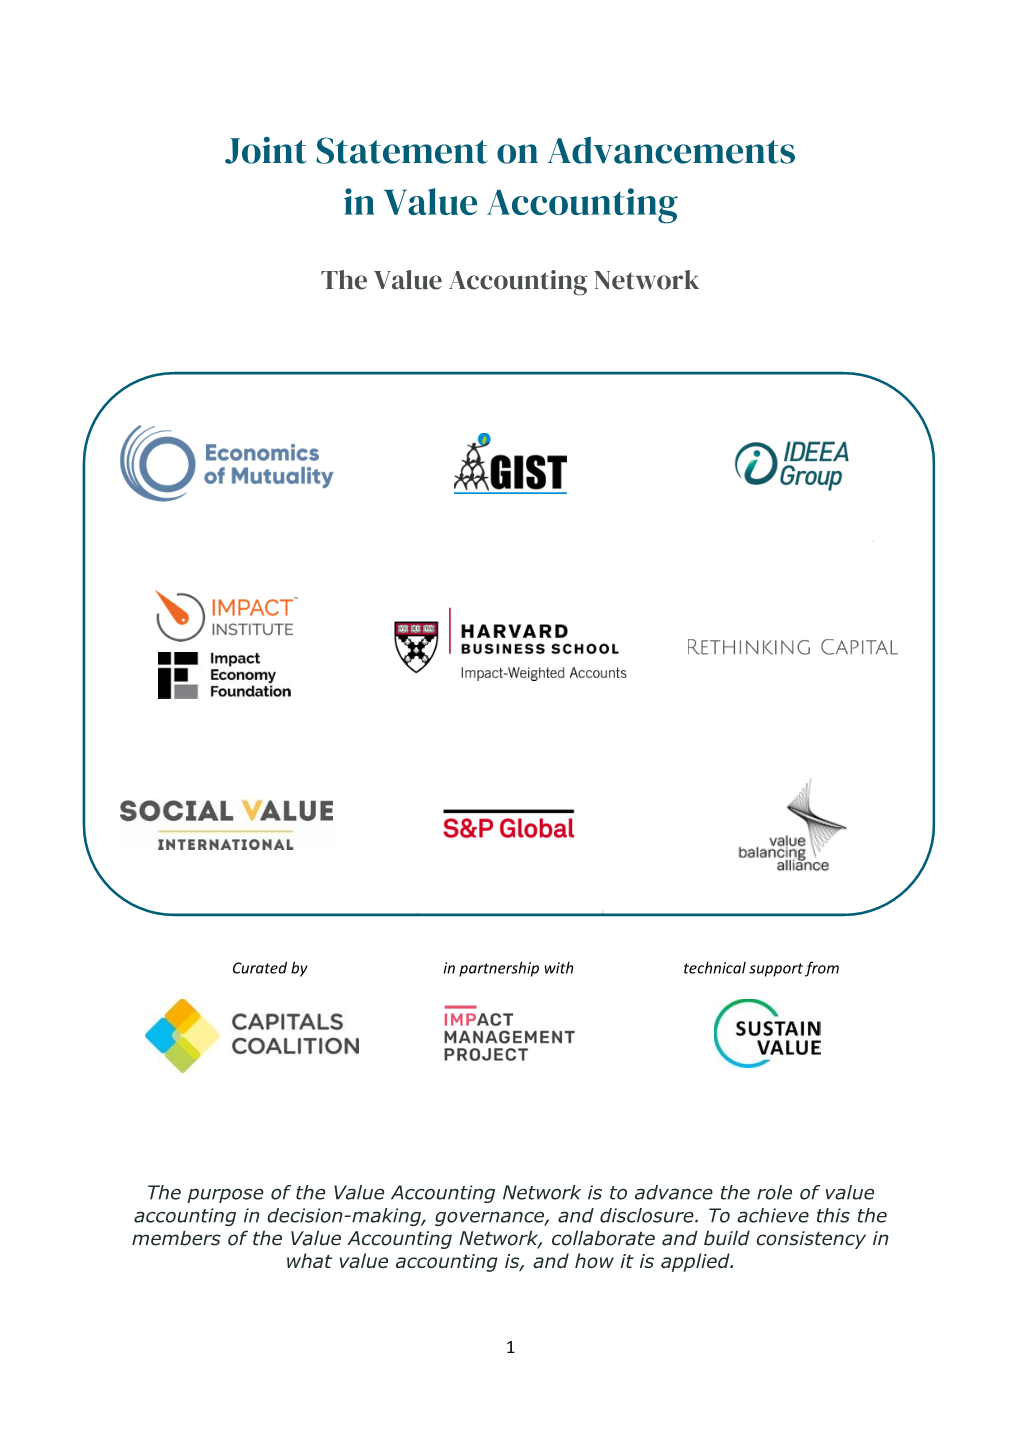 Joint Statement on Advancements in Value Accounting